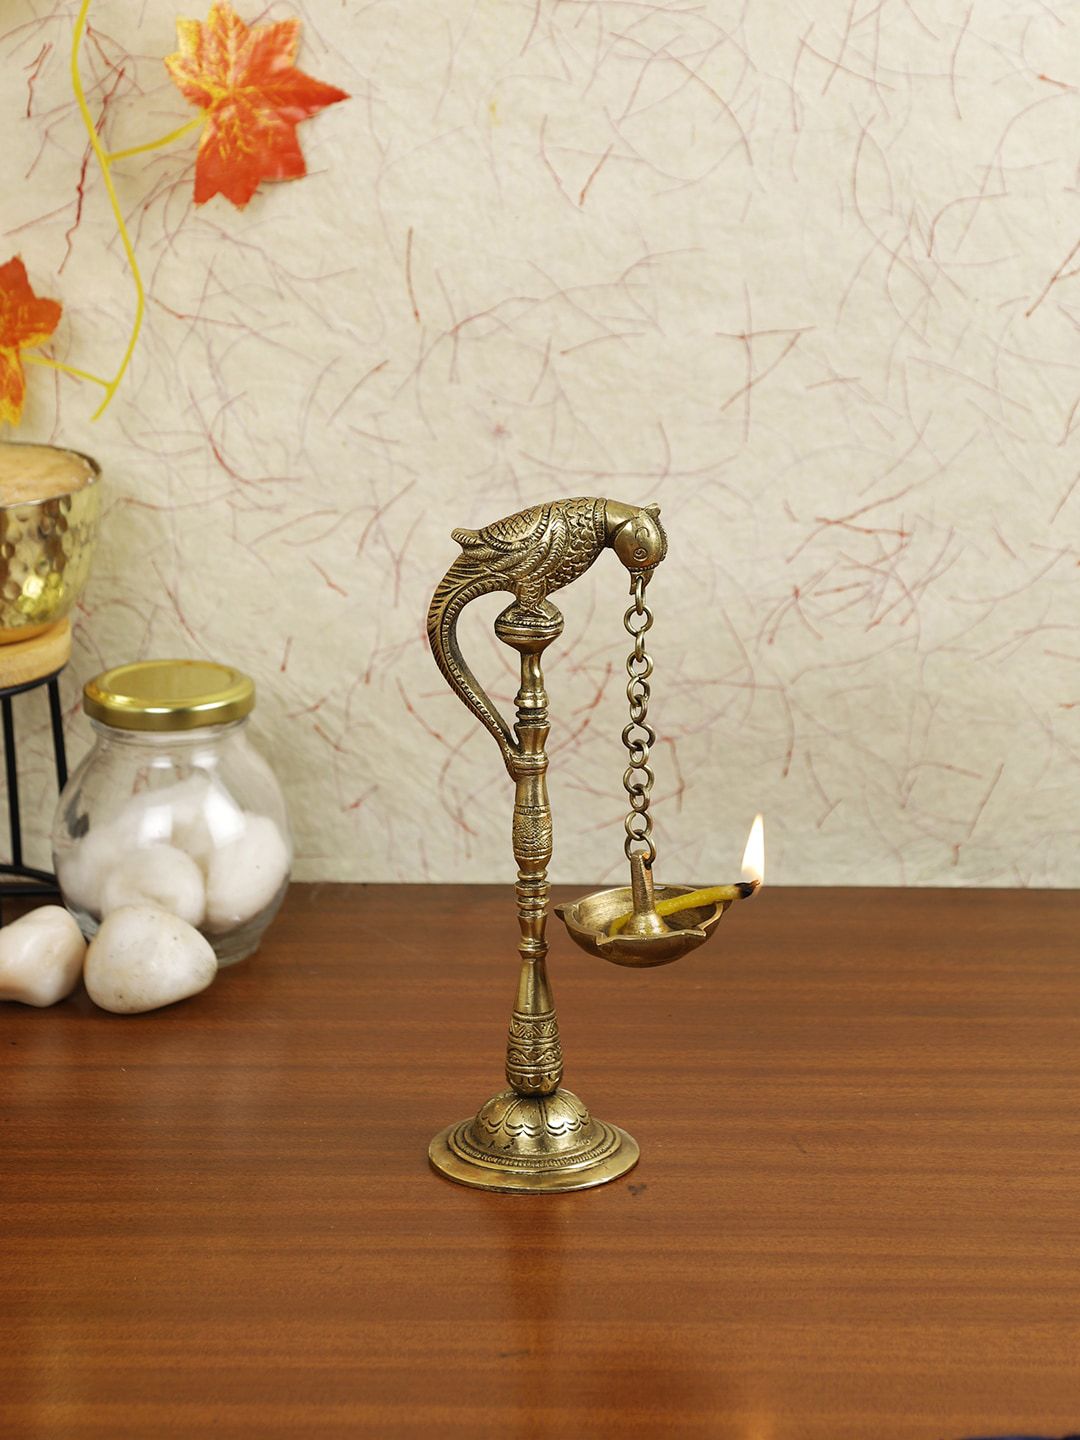 Imli Street Gold-Toned Lamp with Parrot Diya Showpiece Price in India